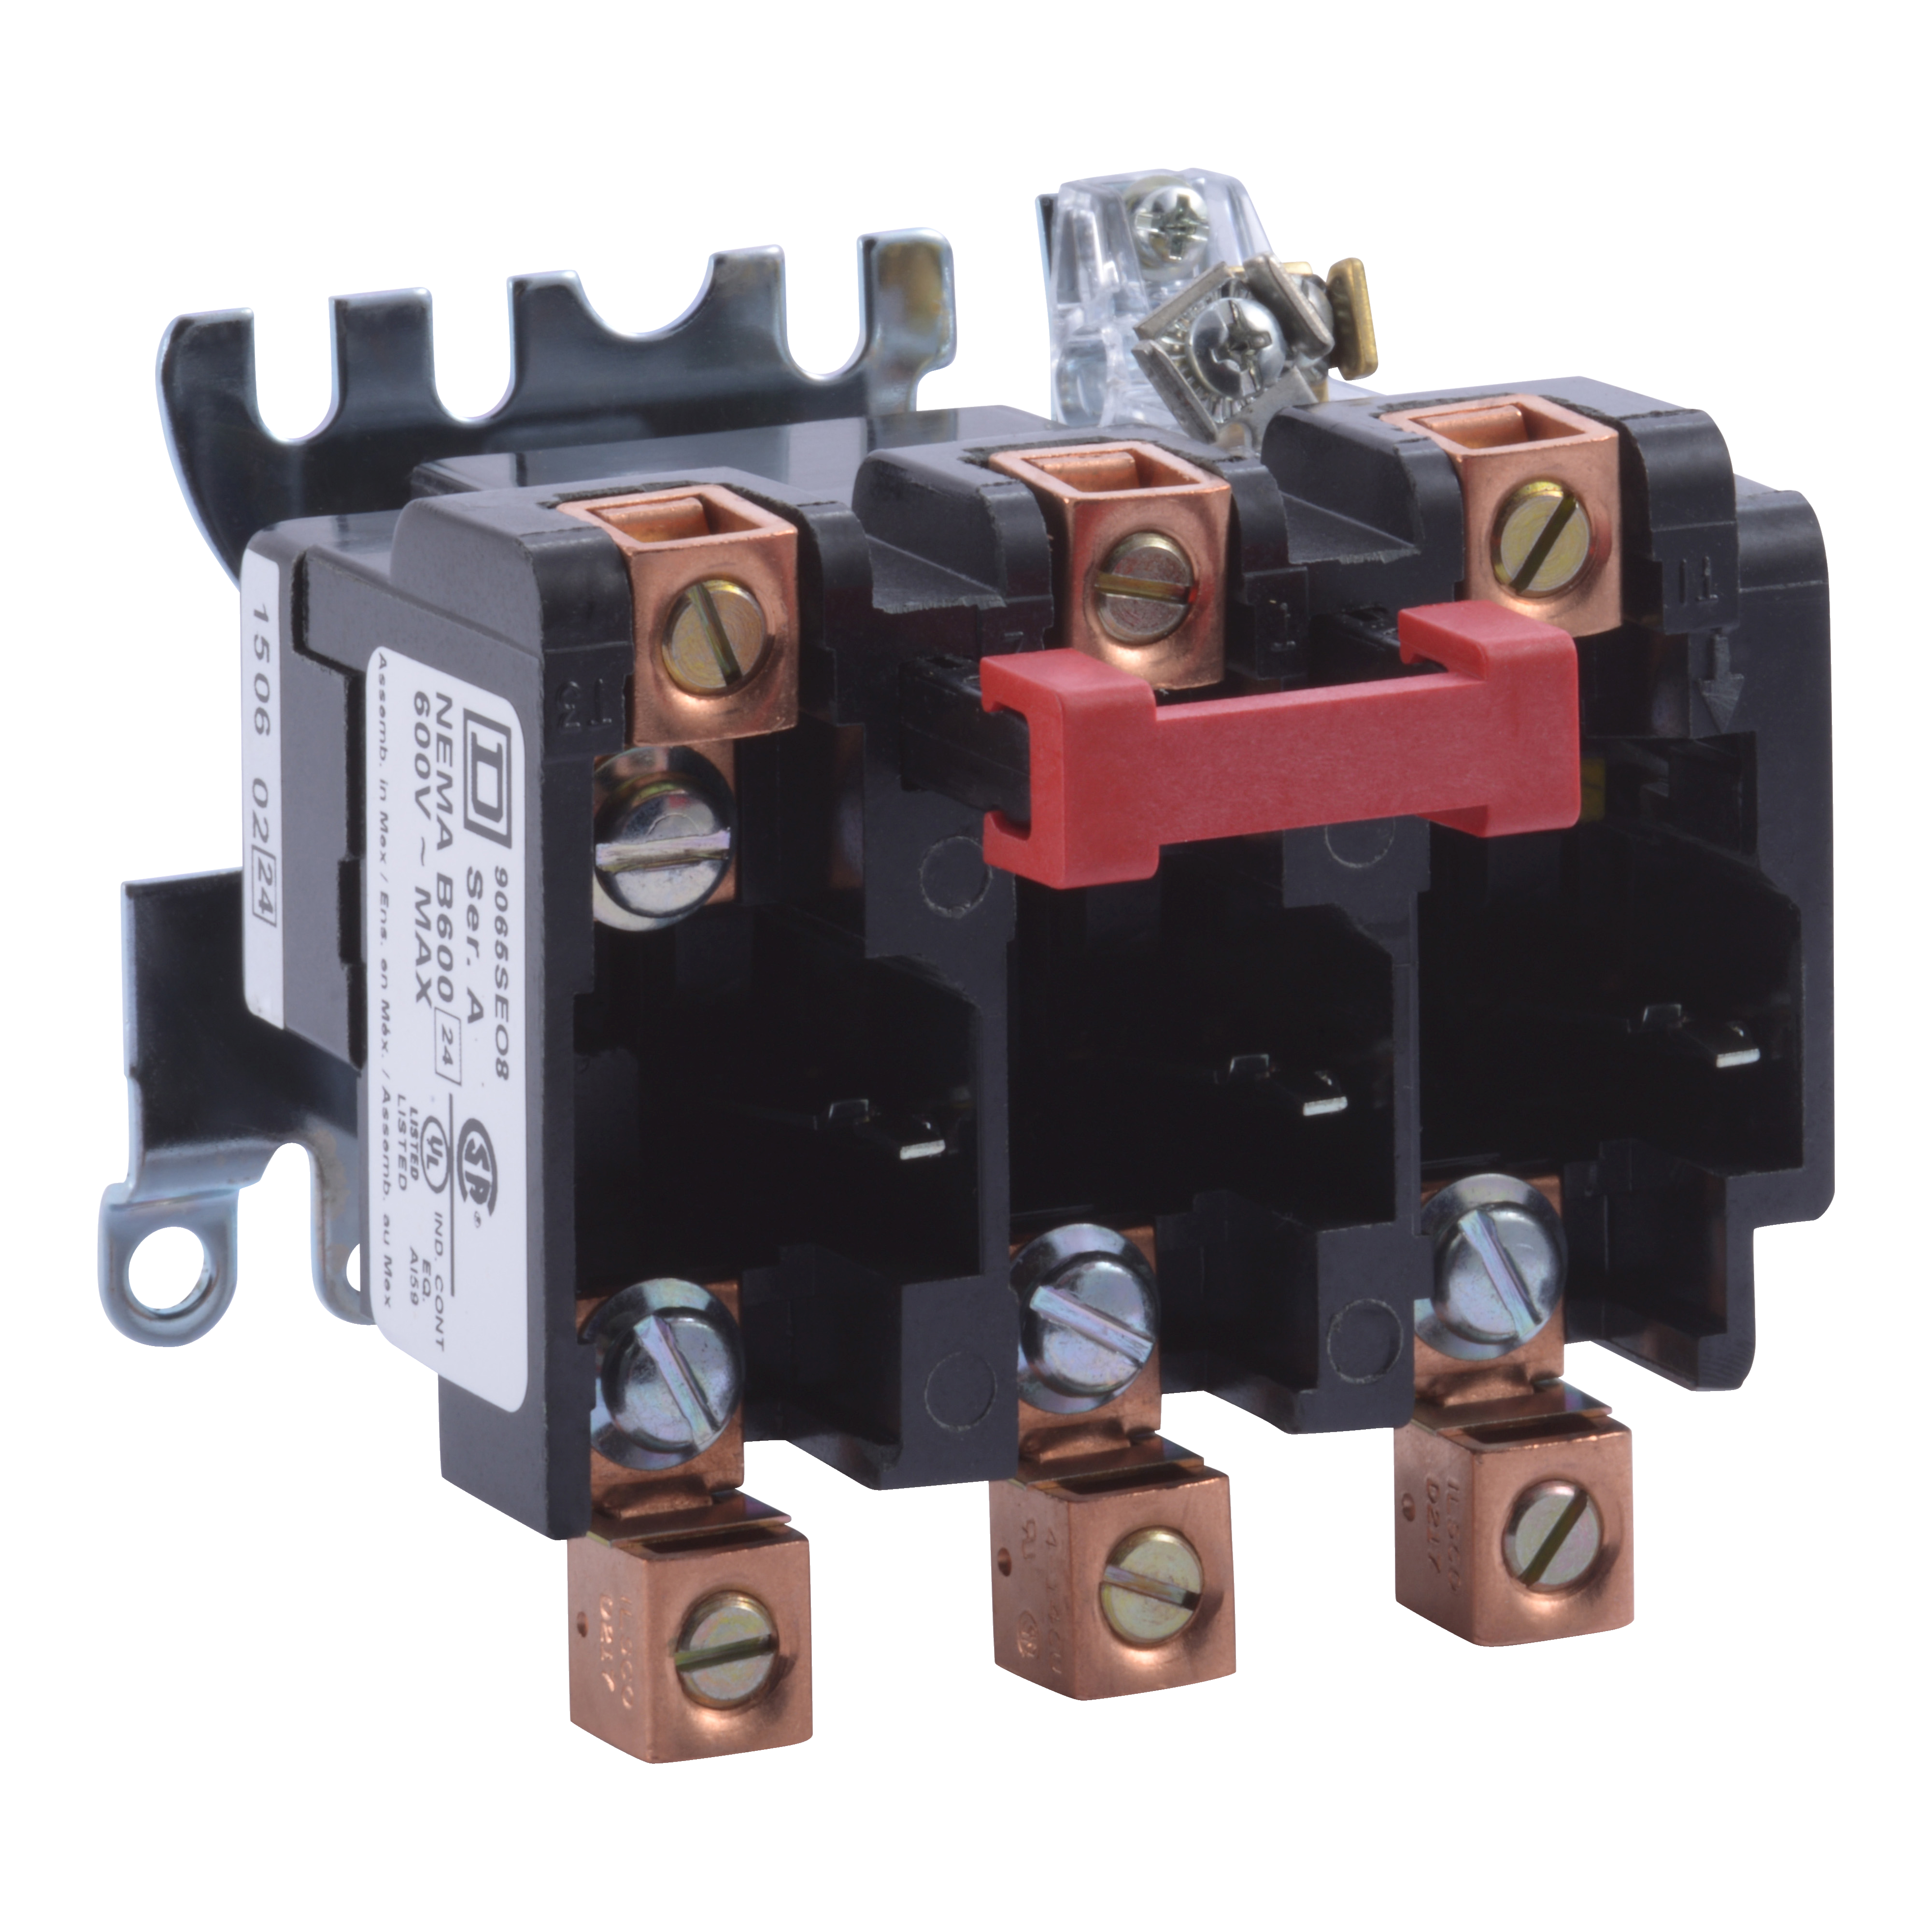 SQUARE D 9065SEO8 : MELTING ALLOY OVERLOAD RELAY 600V 45A